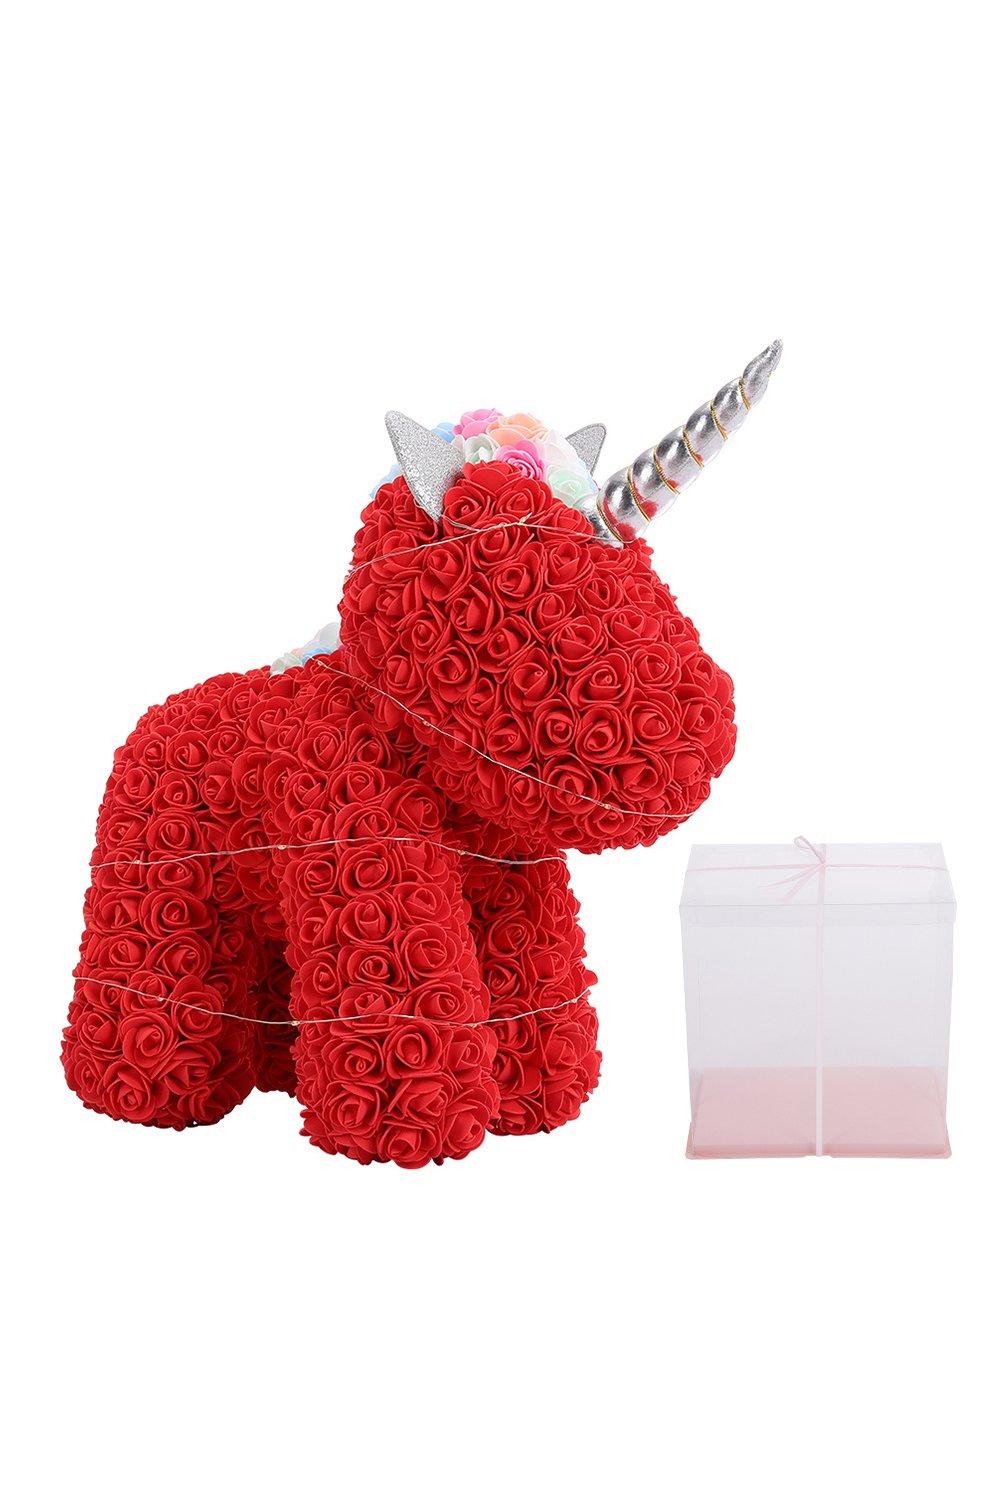 Rose Unicorn Gift Box with LED Lights for Valentin's Day